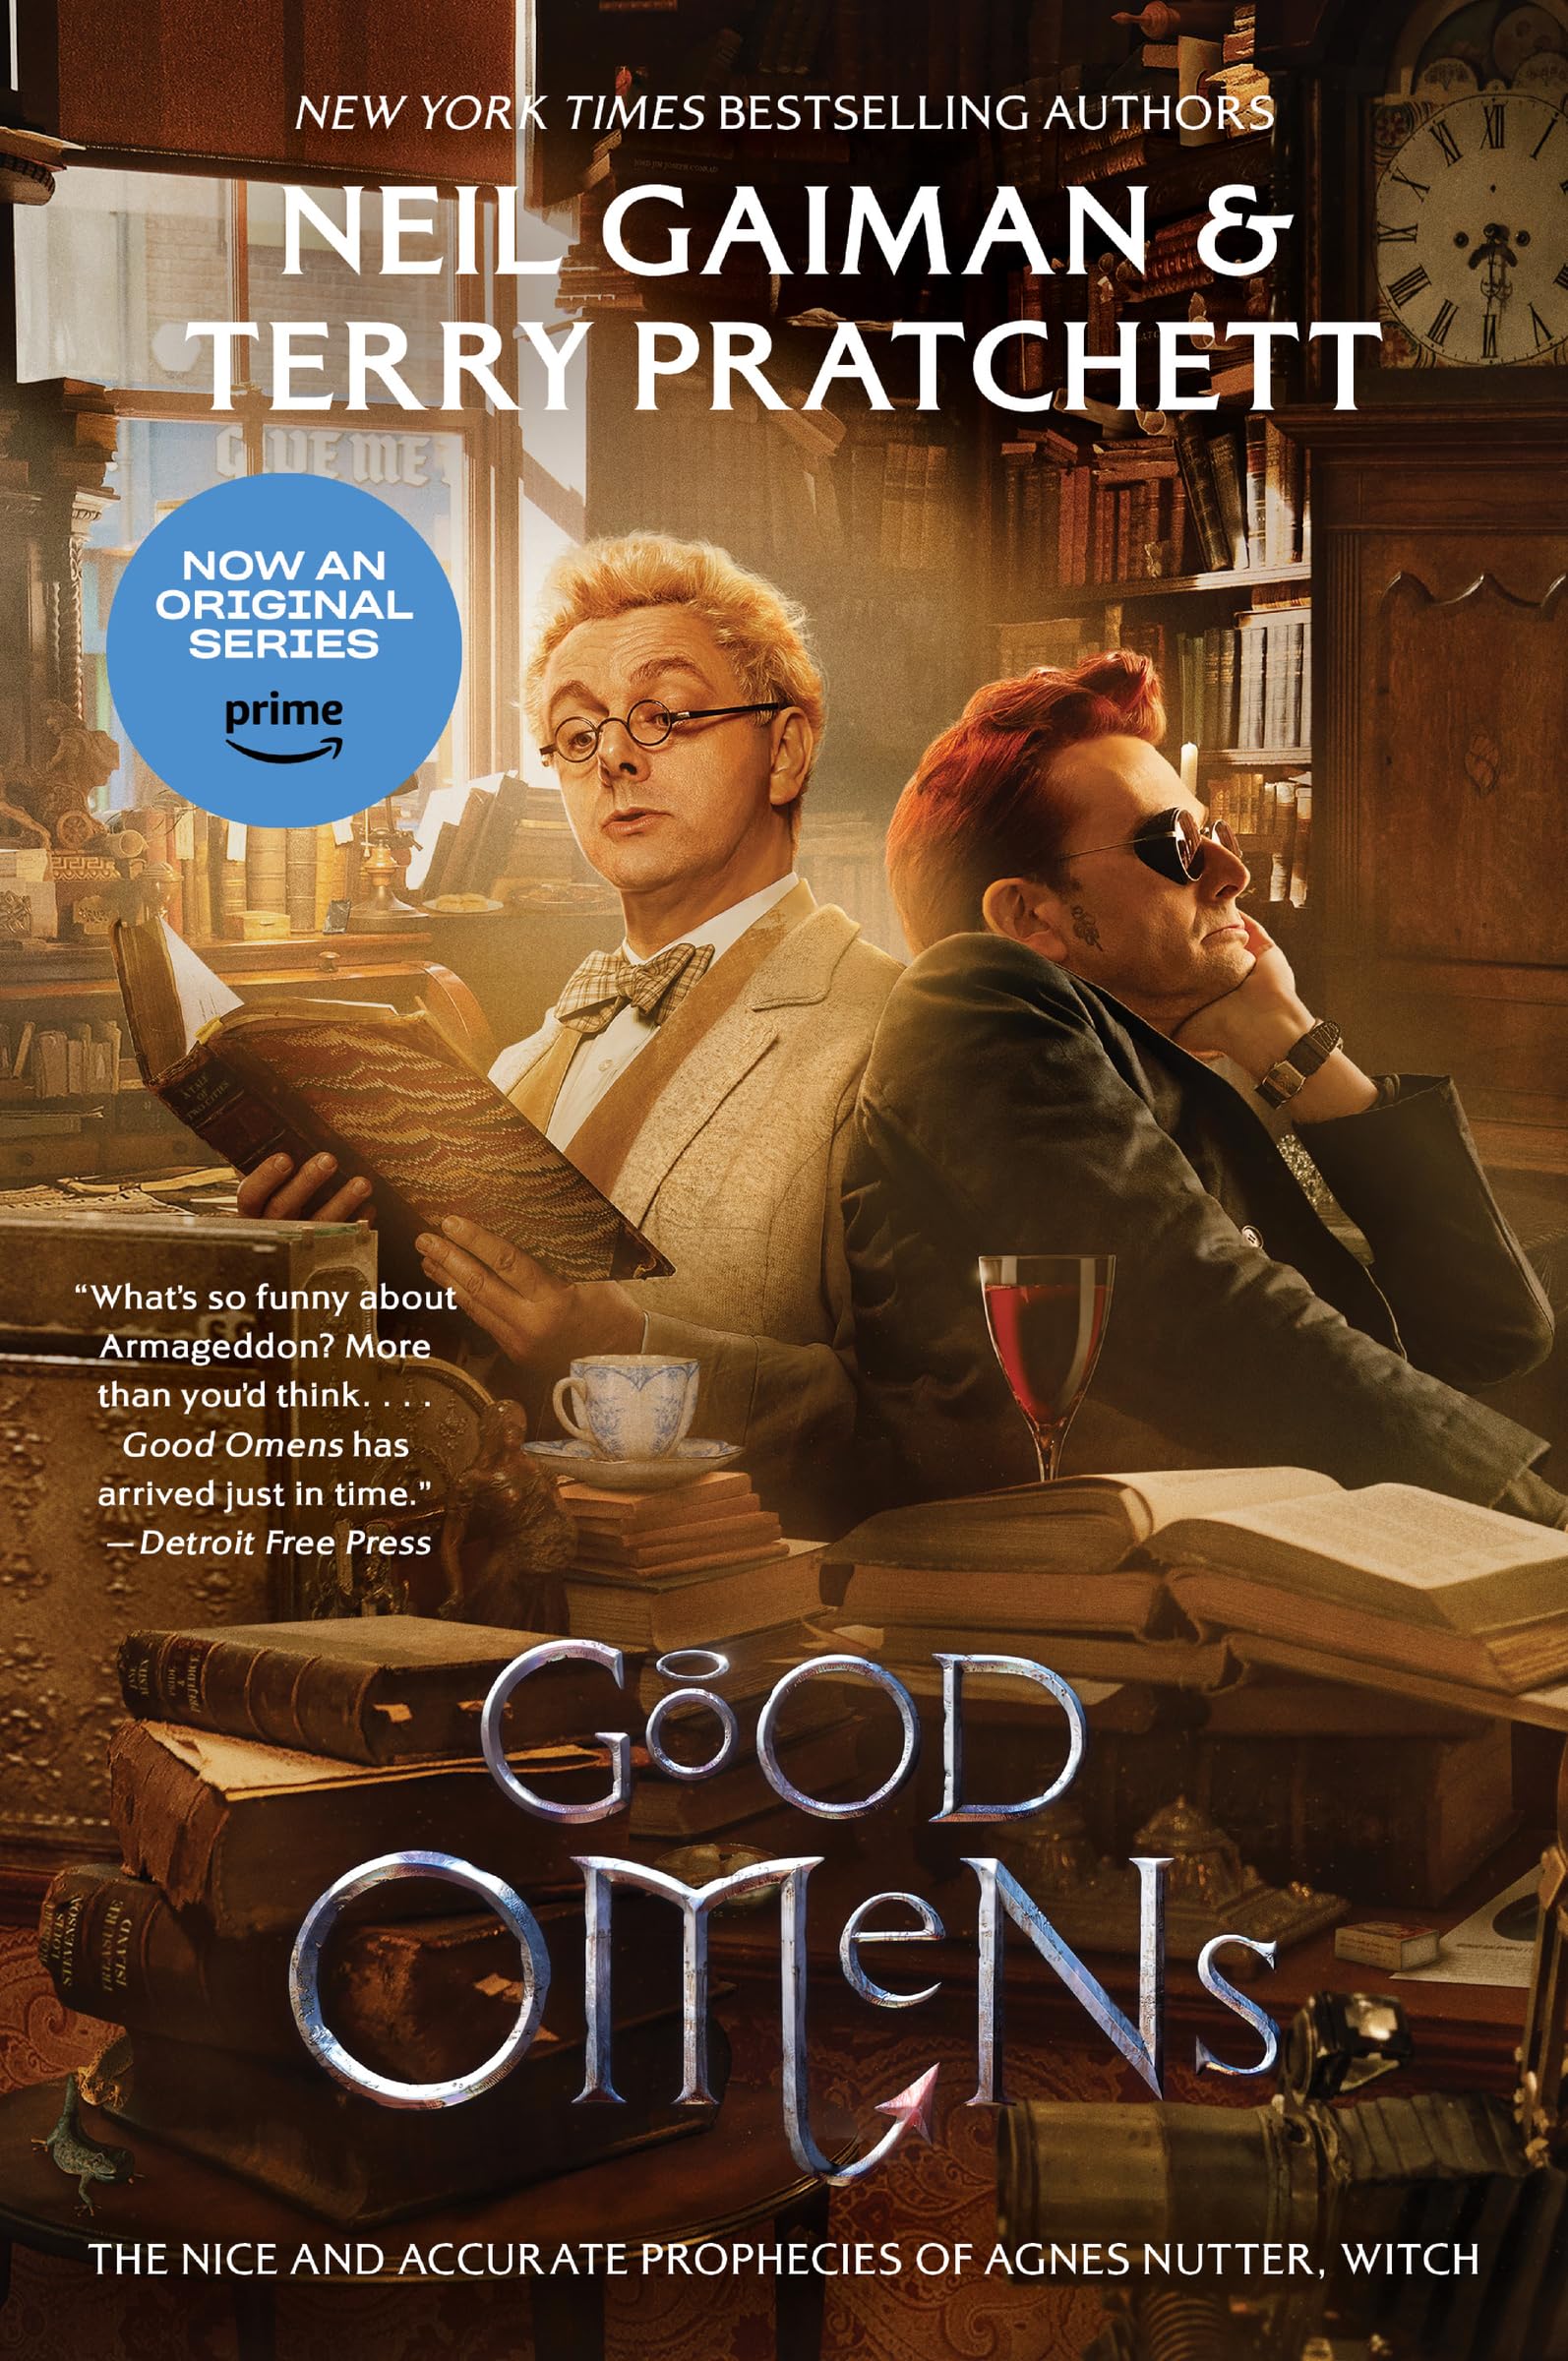 Good Omens: The Nice and Accurate Prophecies of Agnes Nutter, Witch (eBook) by Neil Gaiman, Terry Pratchett $1.99